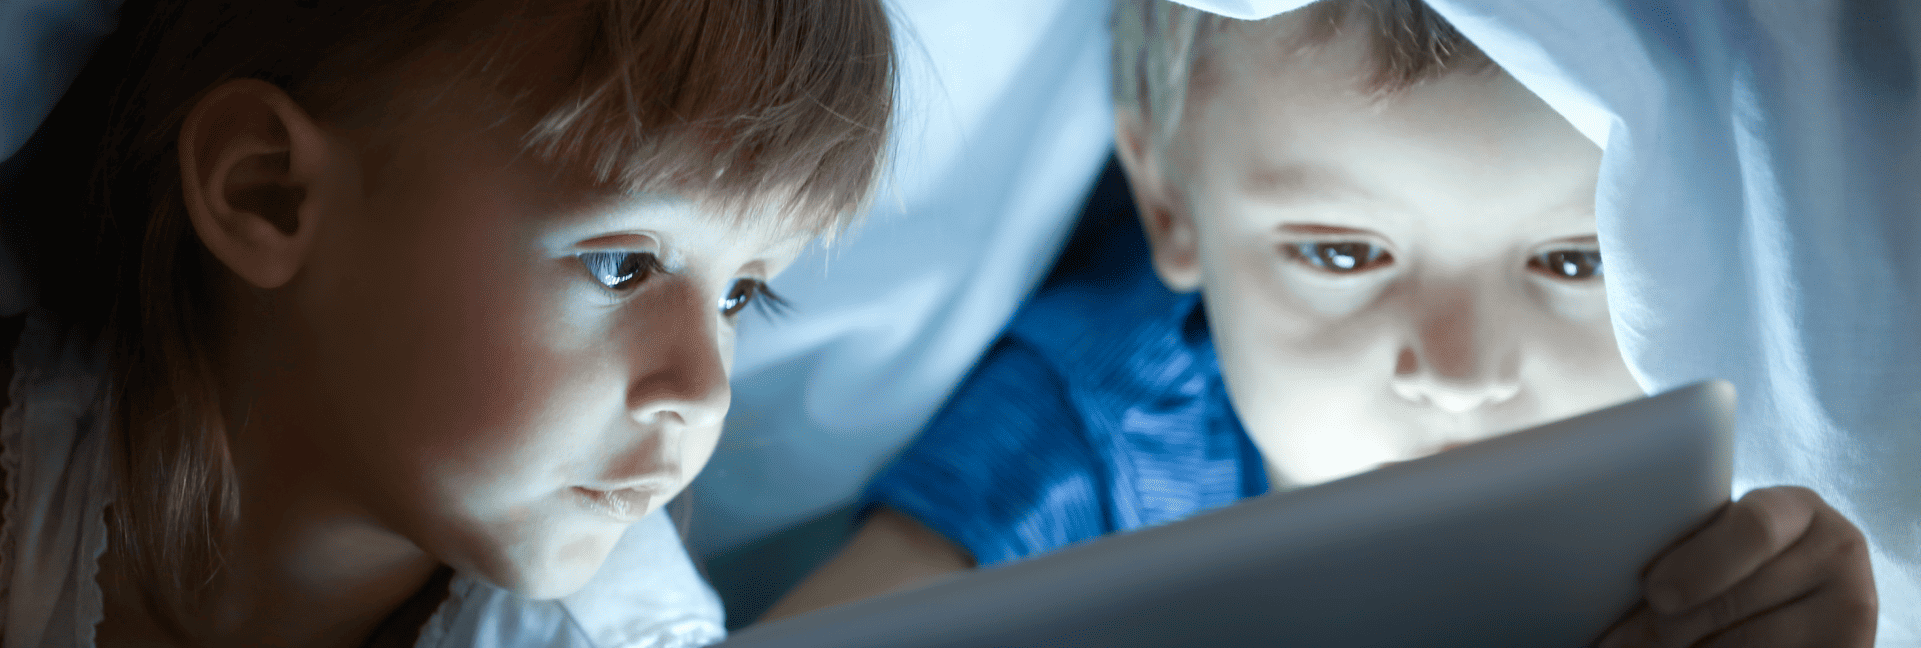 How To Set Limits On Screen Time For Kids - Comwave